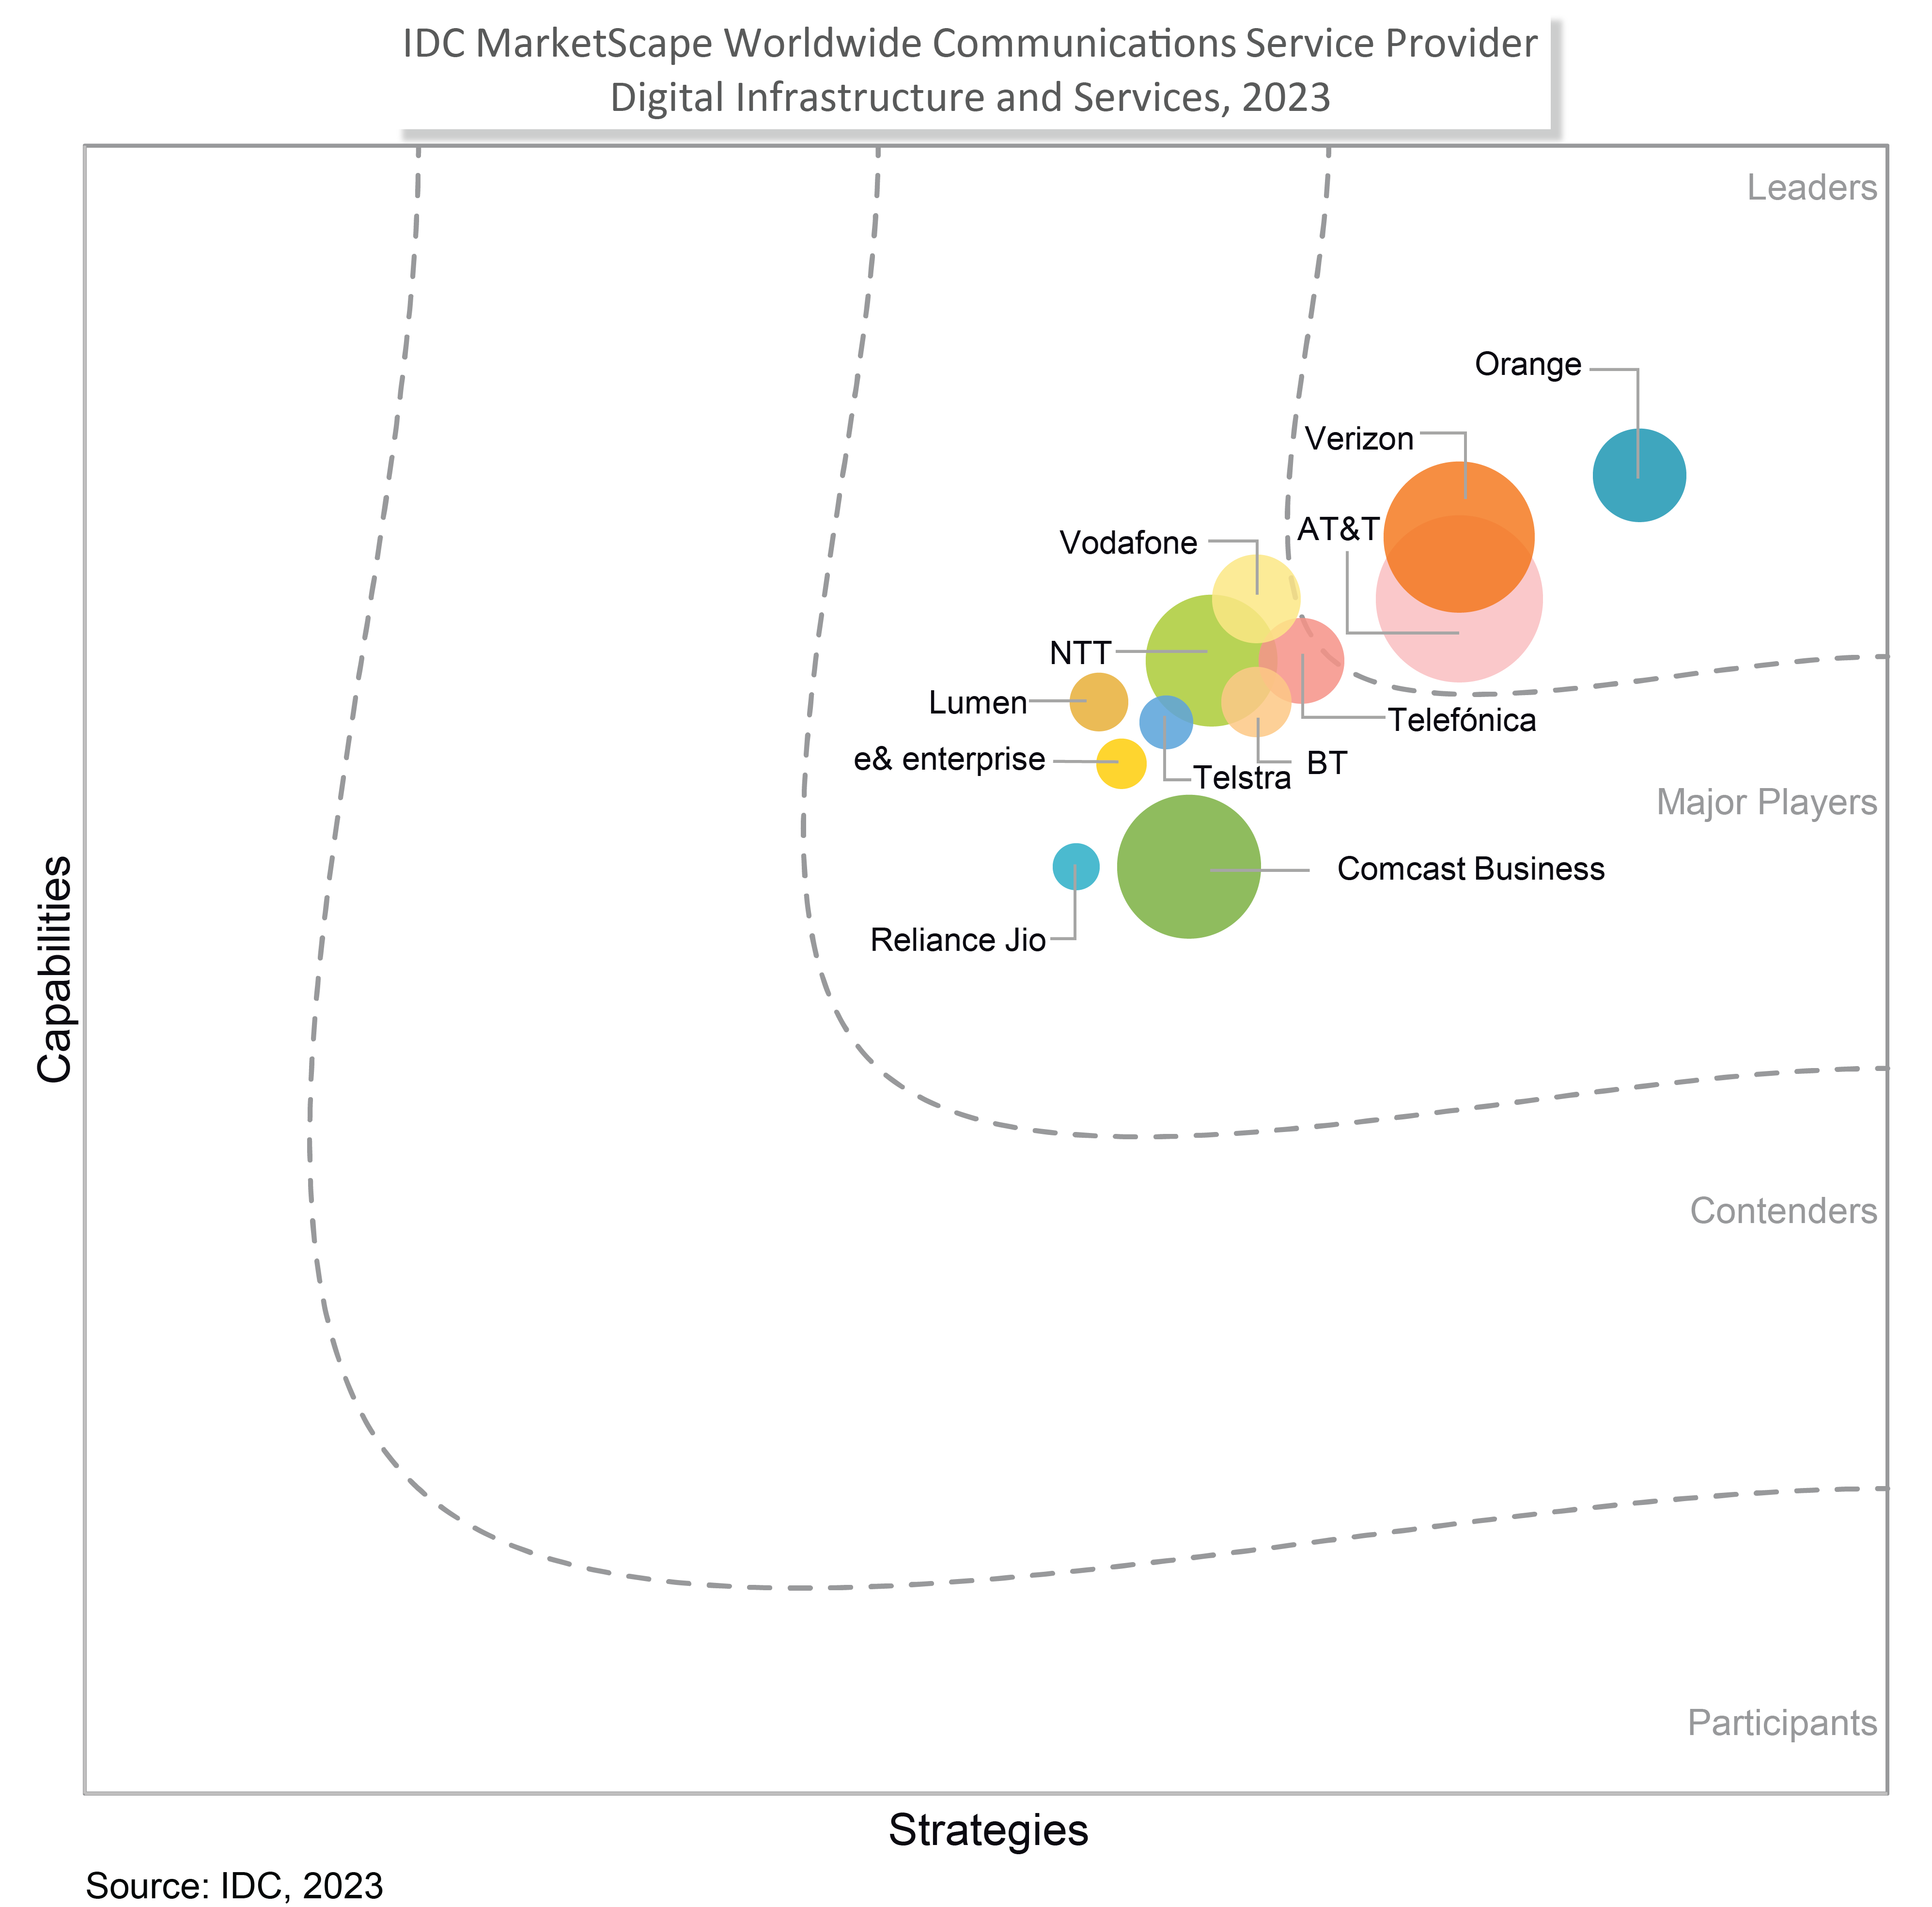 IDC MarketScape Worldwide Communications Service Provider Digital Infrastructure and Services, 2023